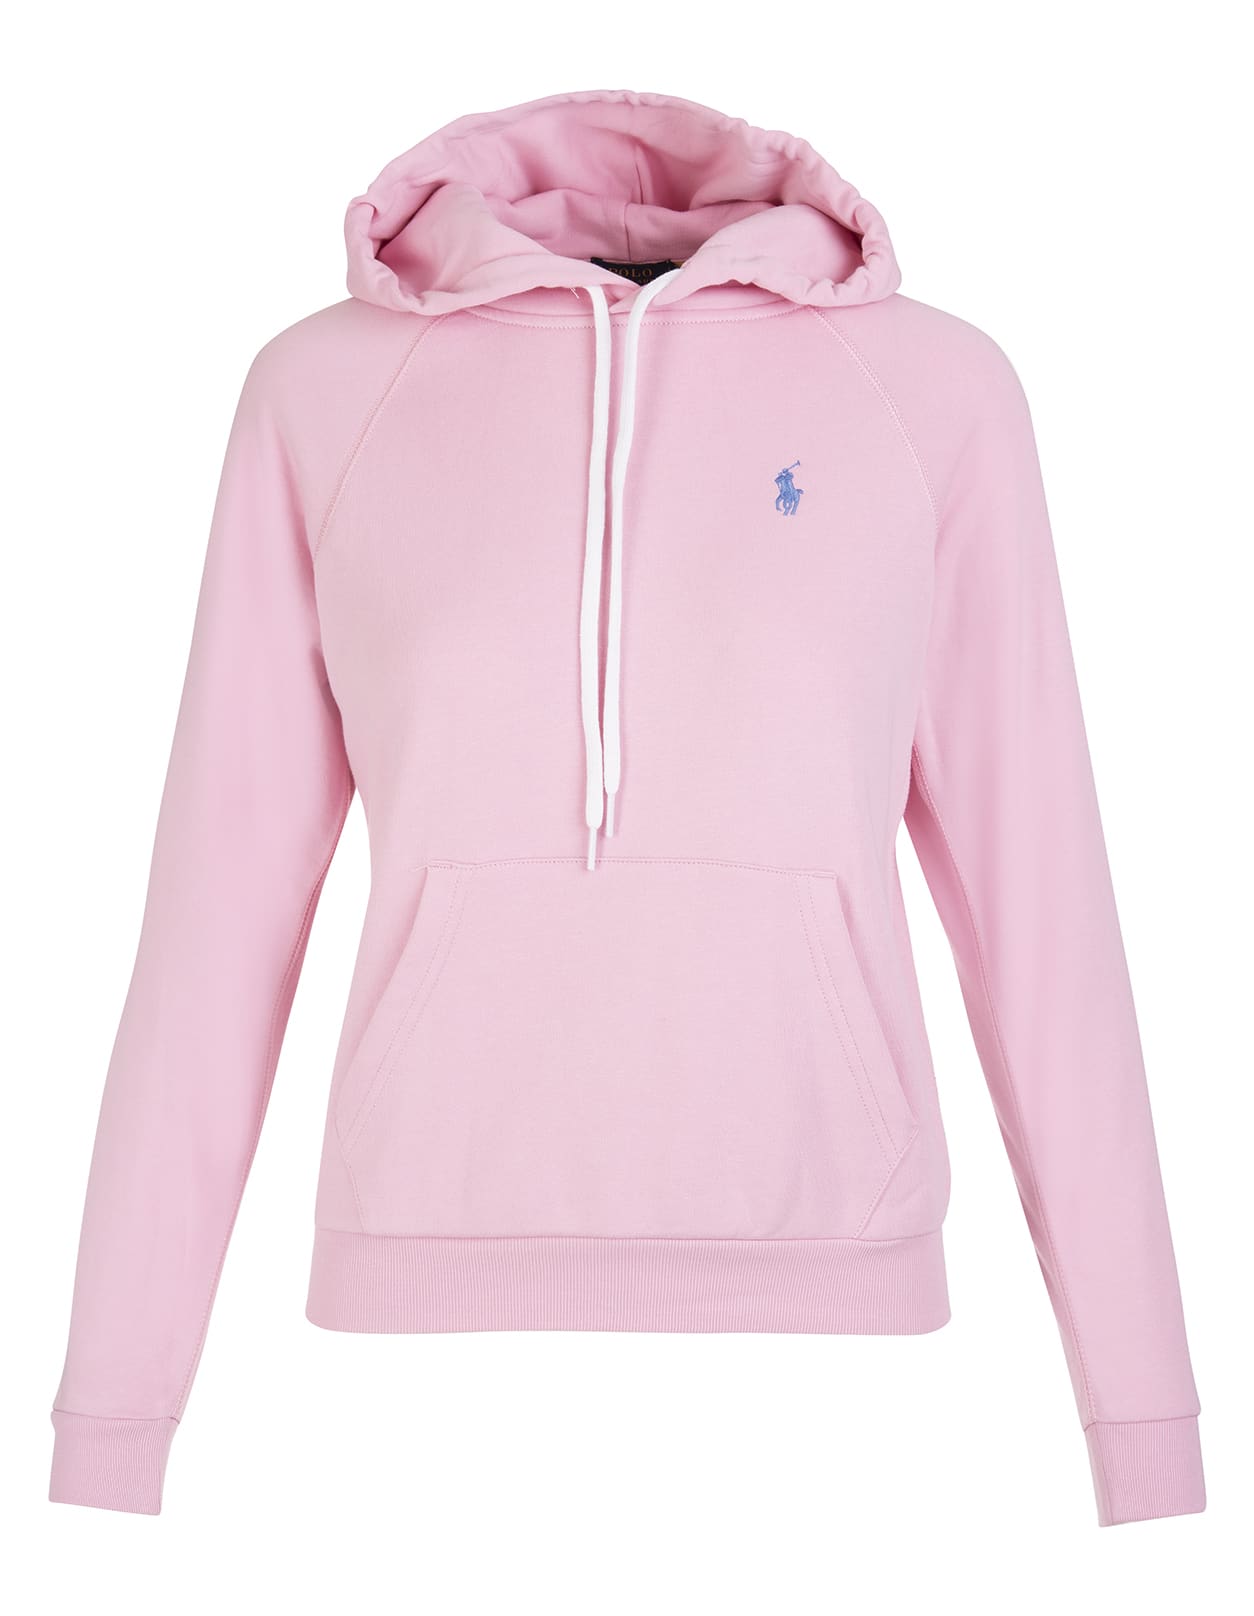 Ralph Lauren Woman Hoodie In Pink Cotton With Blue Pony